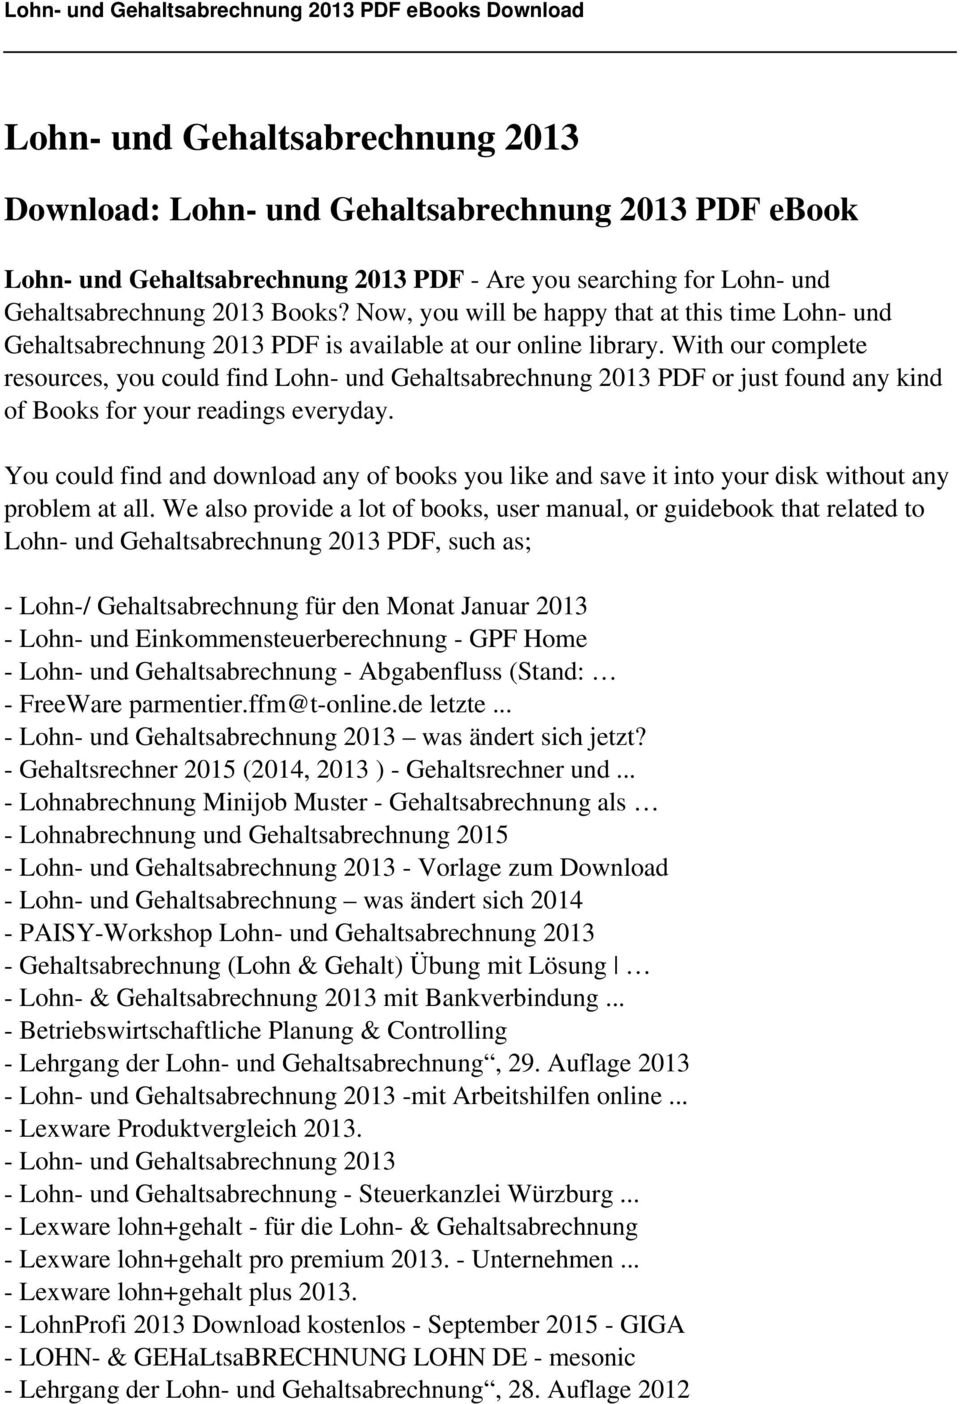 With our complete resources, you could find Lohn- und Gehaltsabrechnung 2013 PDF or just found any kind of Books for your readings everyday.